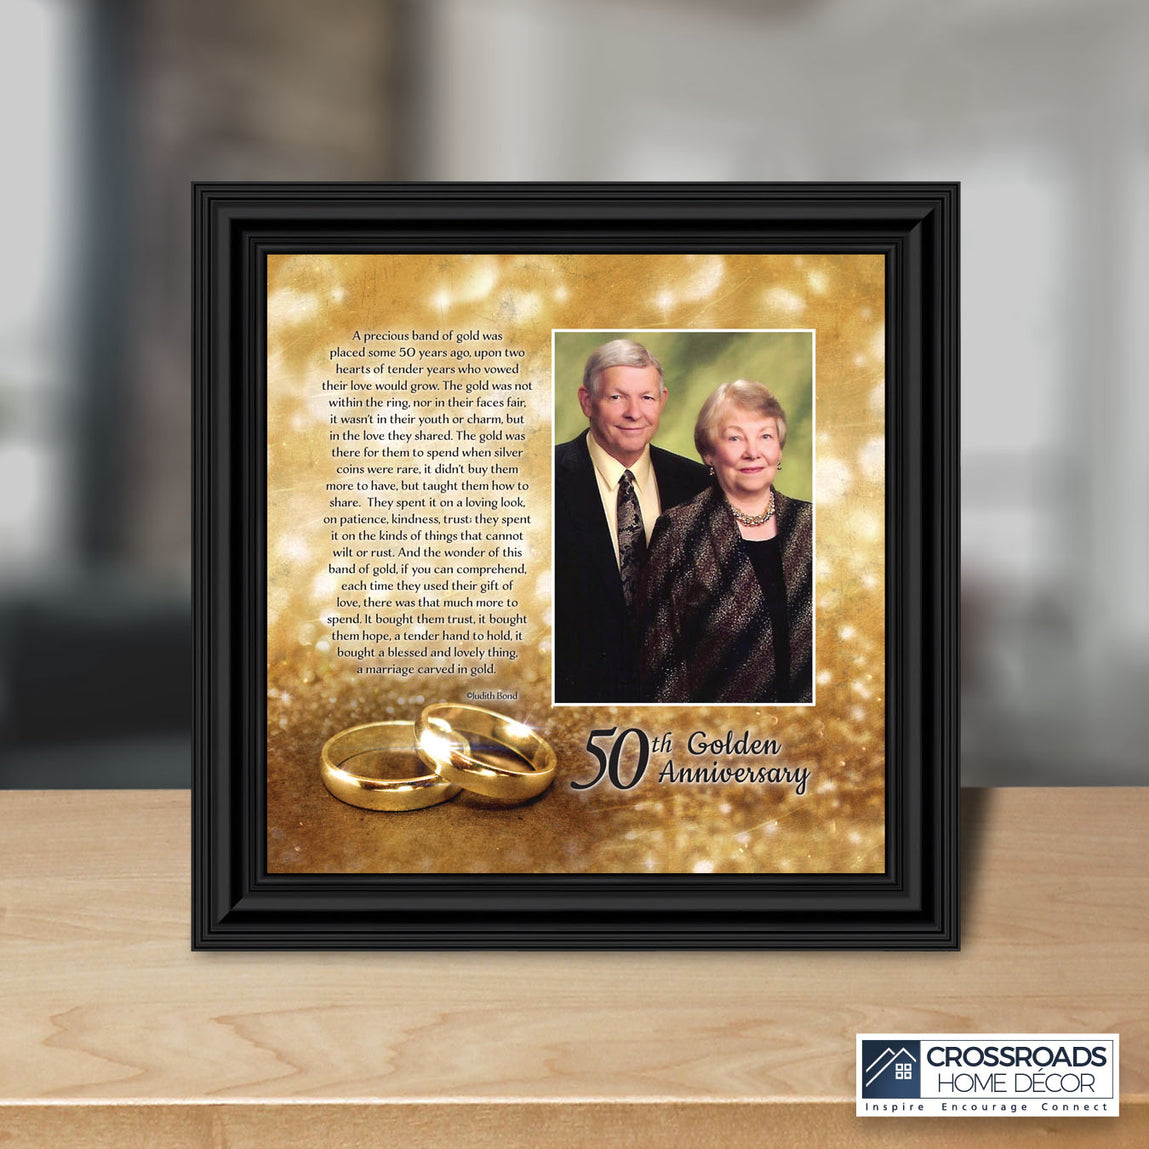 Couple Custom Wooden Engraved Photo Frames For Valentine's Day Wedding  Anniversary Gifts - Ubobblehead